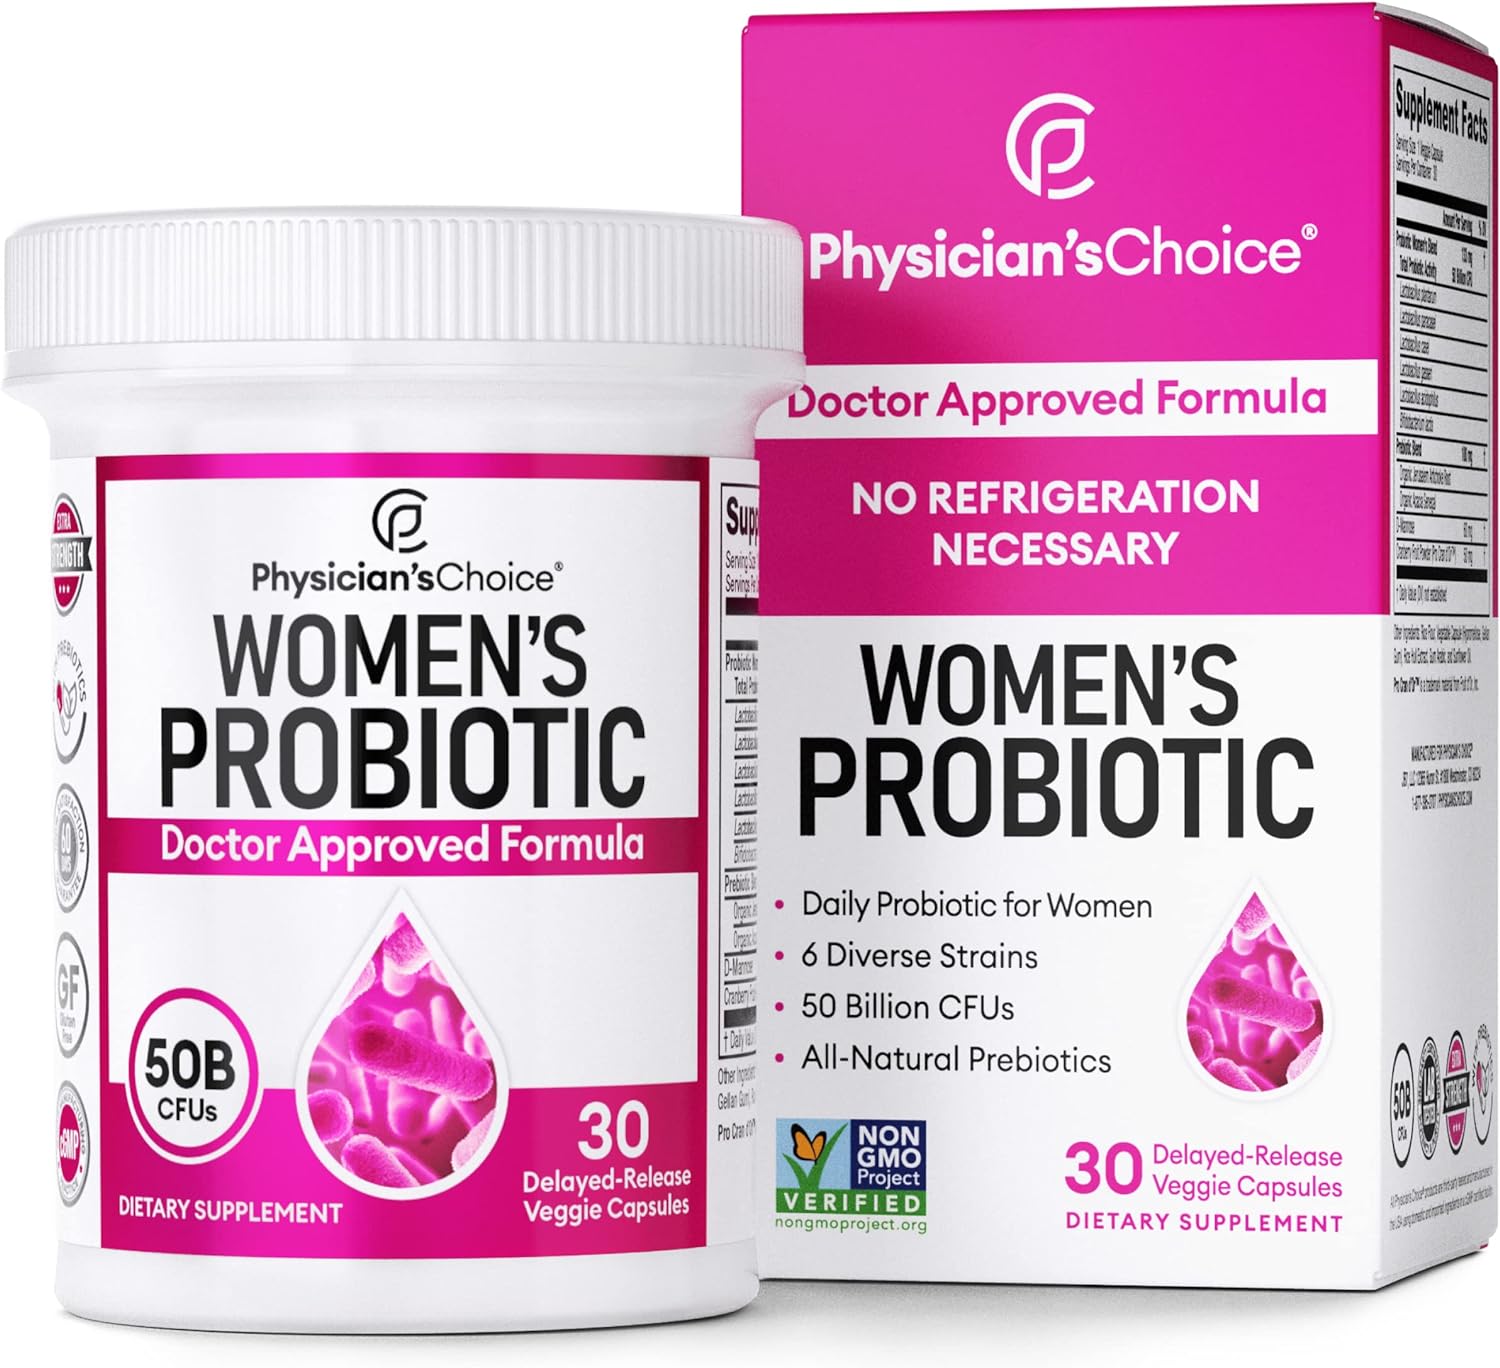 Physician’s Choice Probiotics for Women Review